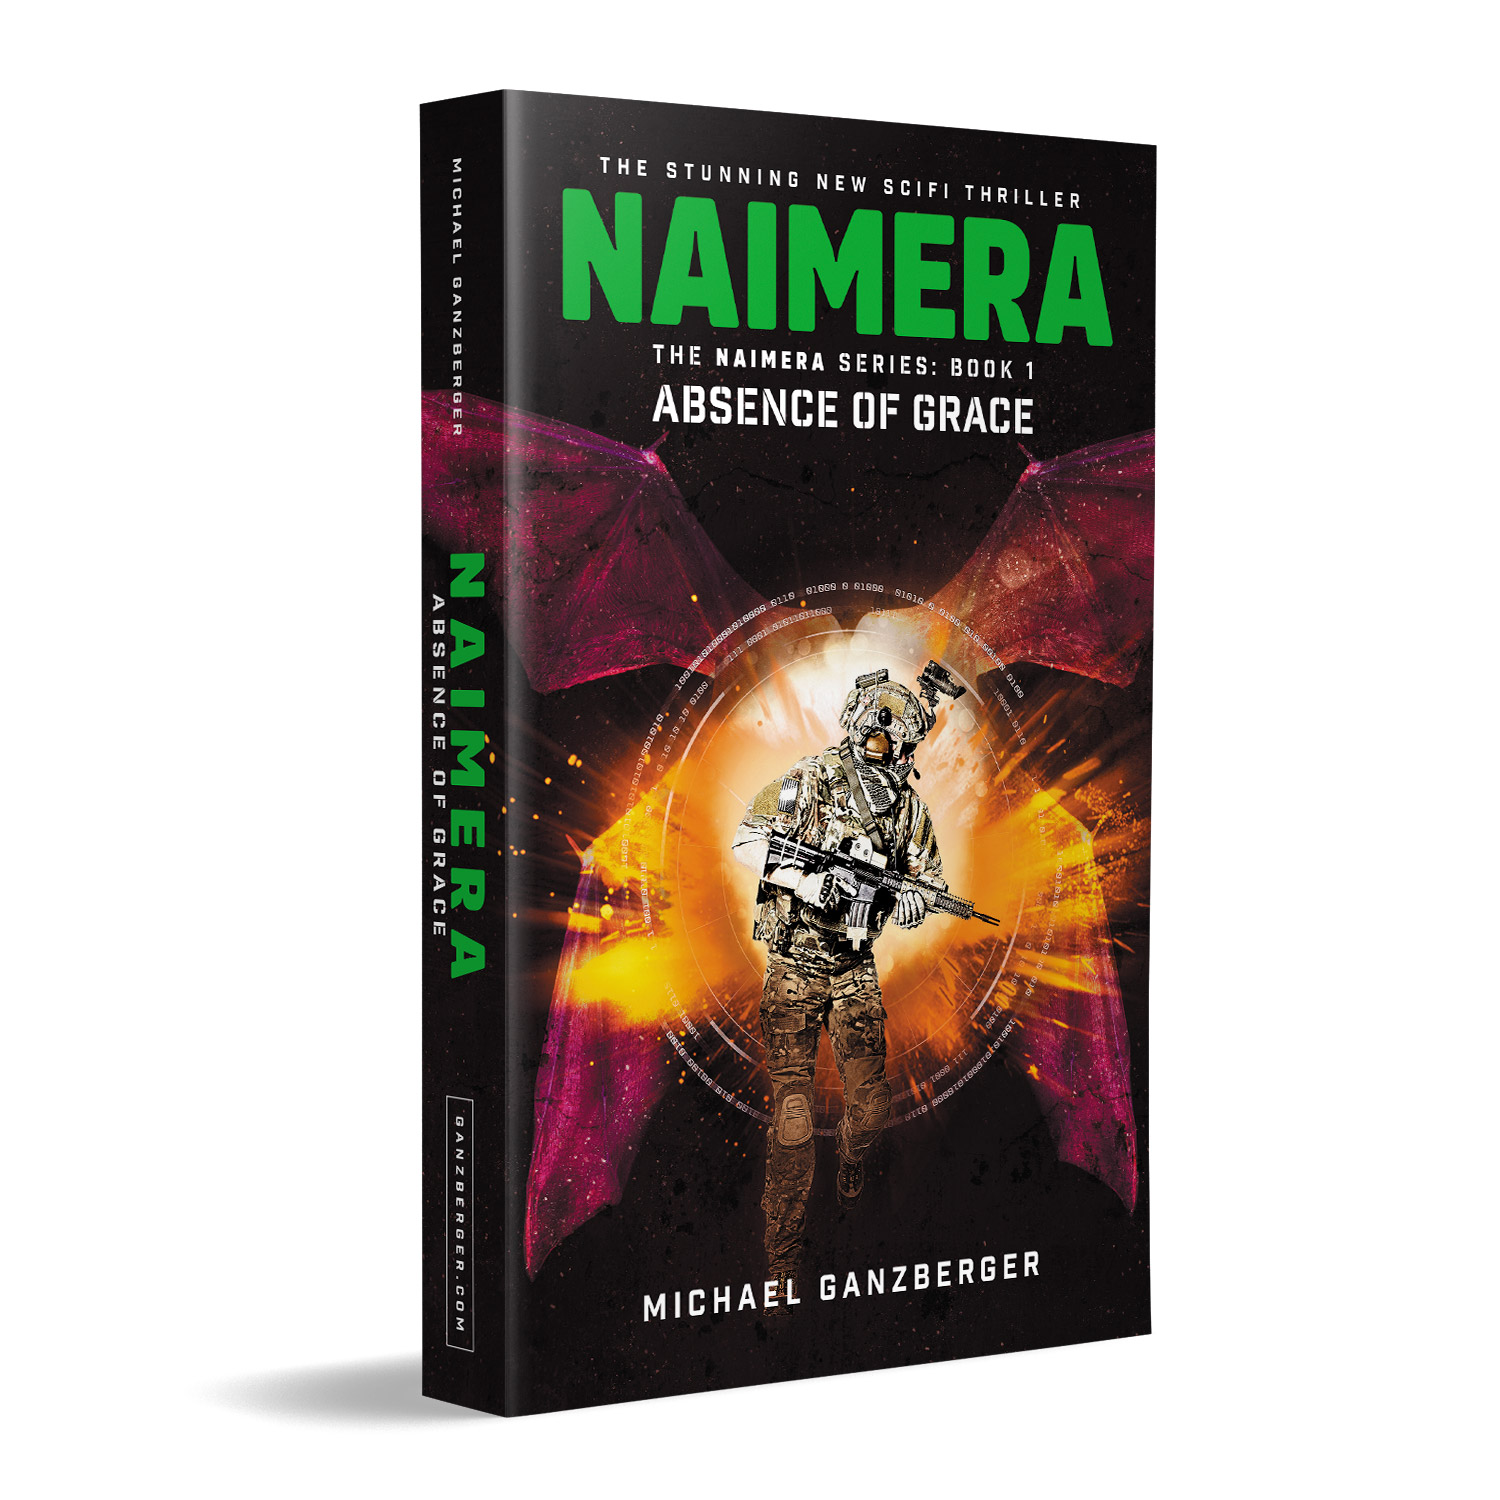 'NAIMERA' is groovy military scifi thriller. The author is Michael Ganzberger. The book cover design and interior formatting are by Mark Thomas. To learn more about what Mark could do for your book, please visit coverness.com